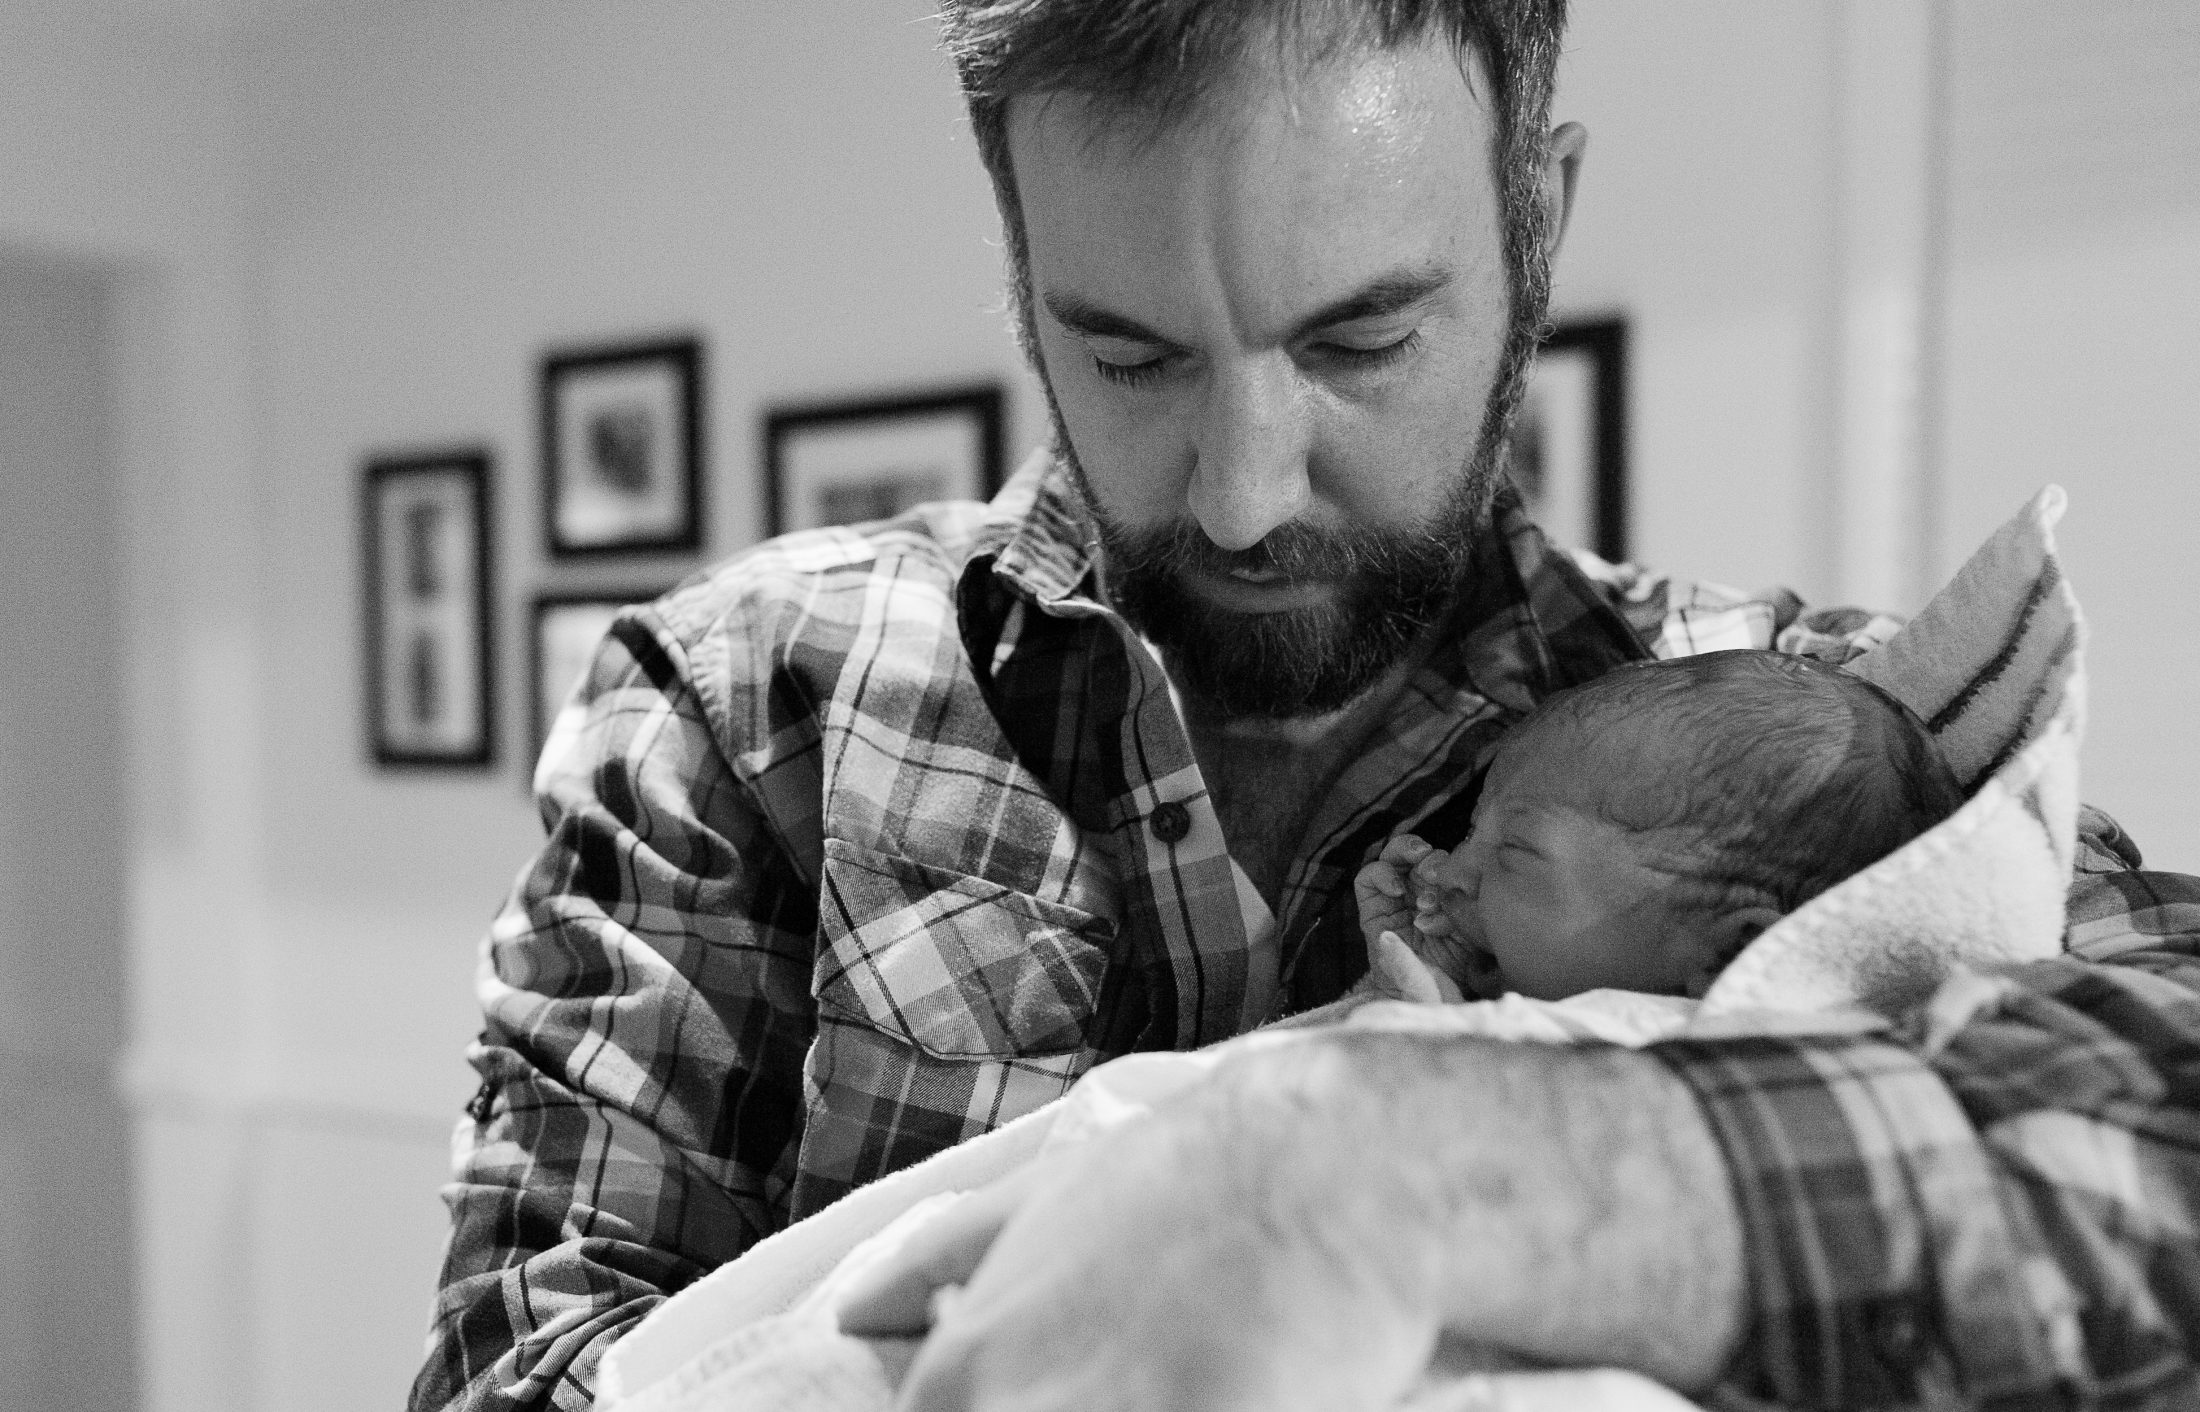 DC widow blog writer Marjorie Brimley's son, Tommy, held by his father, Shawn just after his home birth